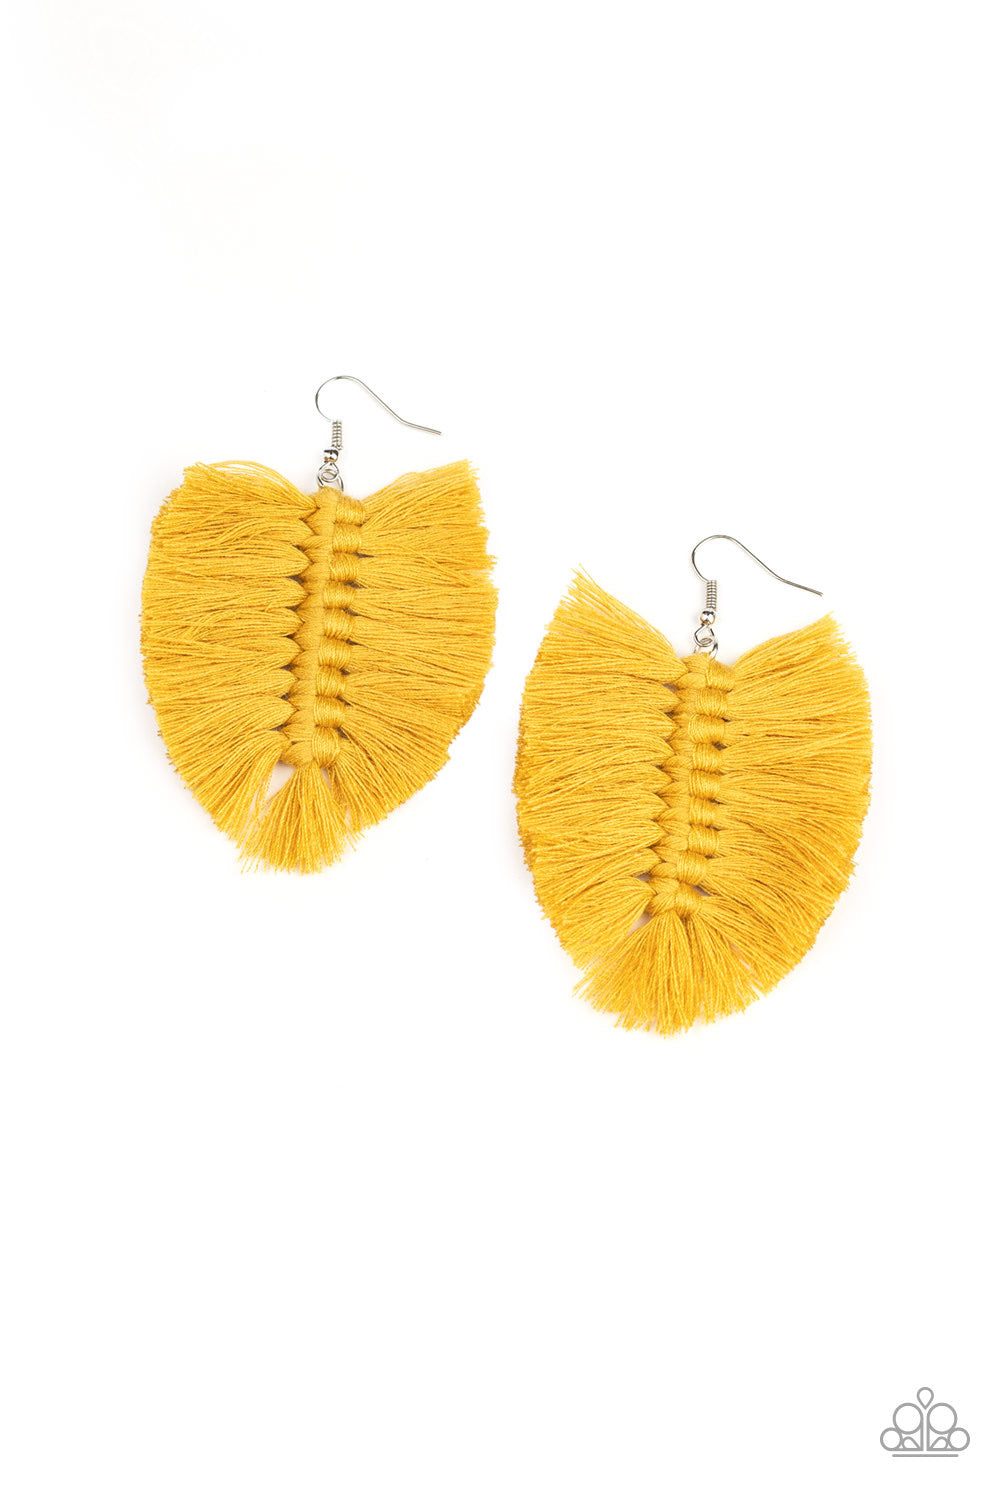 Knotted Native Yellow-Earrings